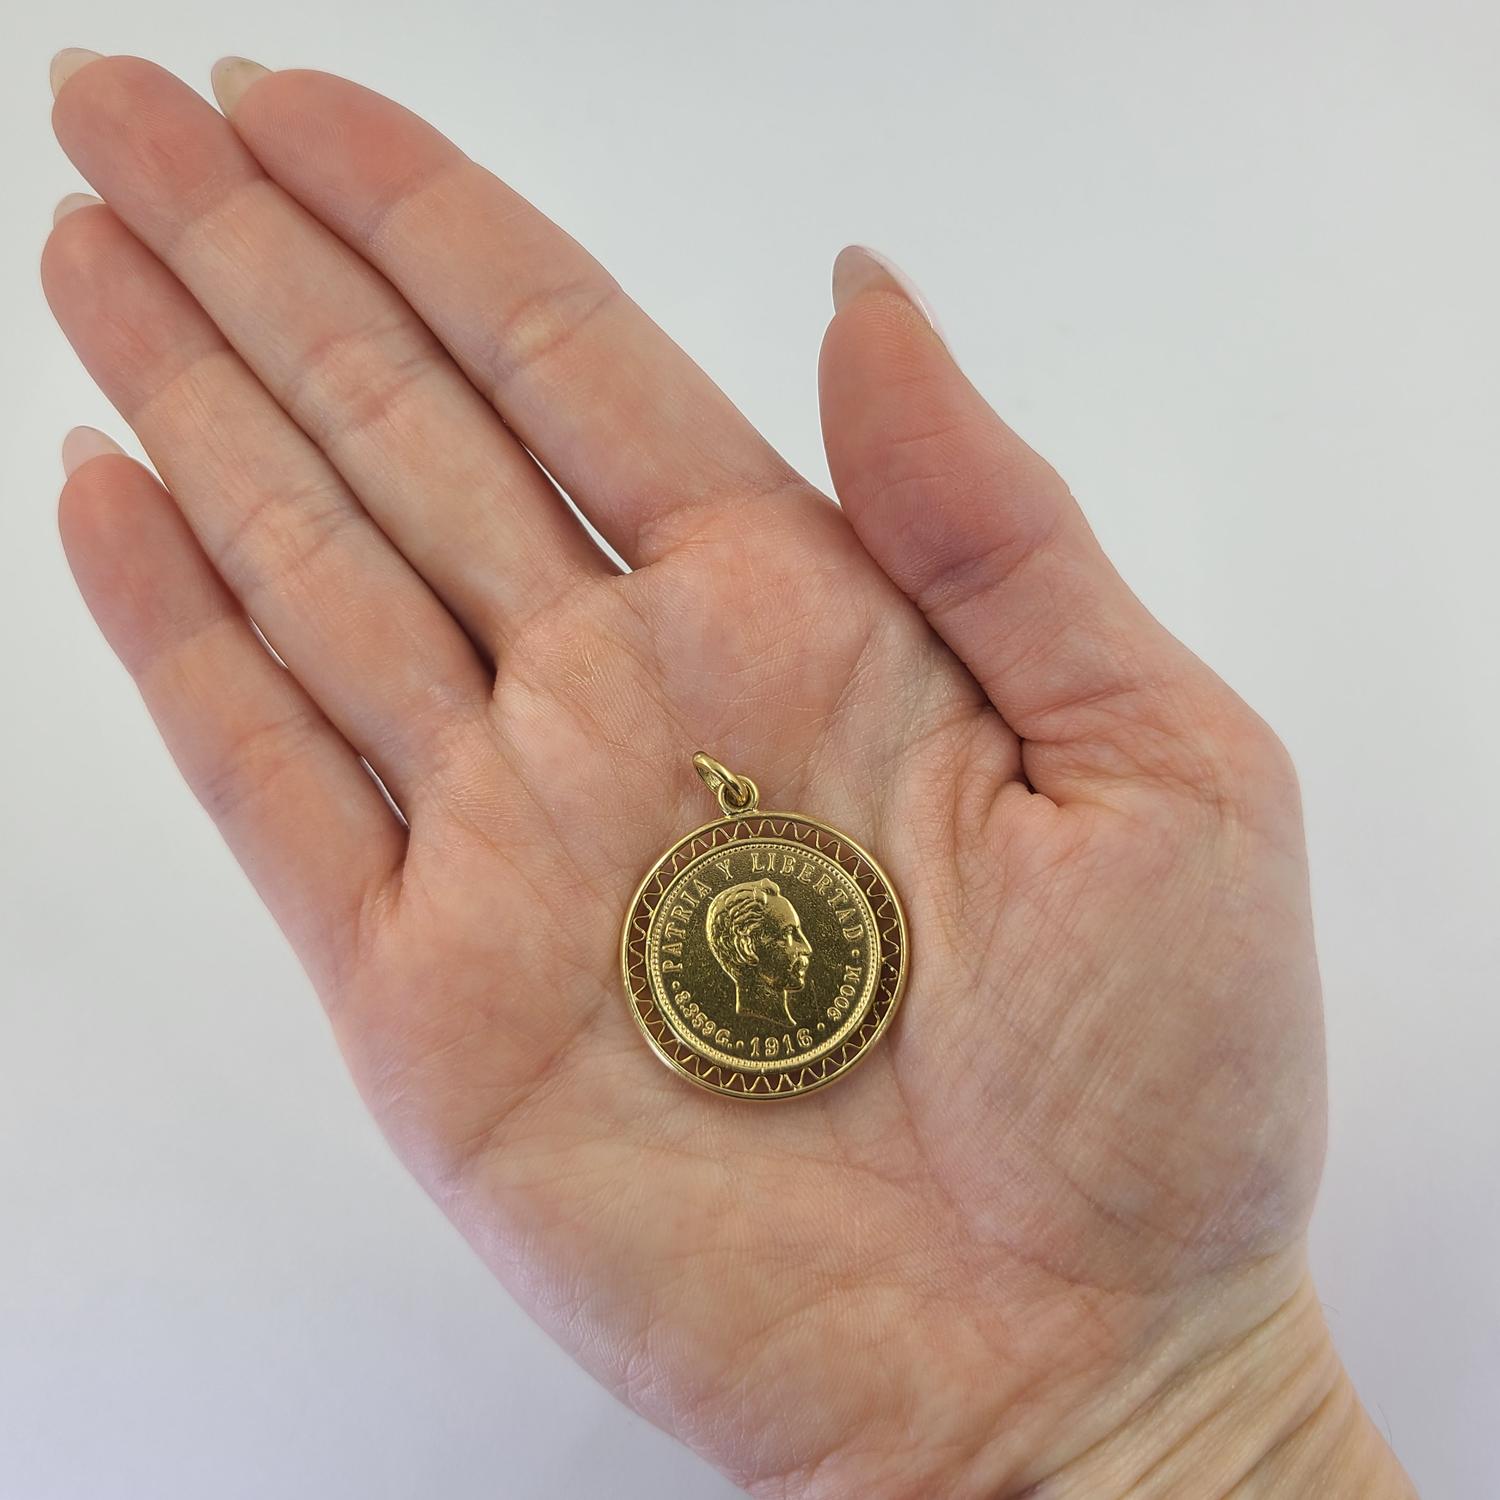 18 Karat Yellow Gold Zig Zag Bezel Pendant Featuring A 22 Karat Yellow Gold Cuban 5 Peso From 1916. 1.4 Inches Long Including Bale. Finished Weight Is 10.8 Grams.